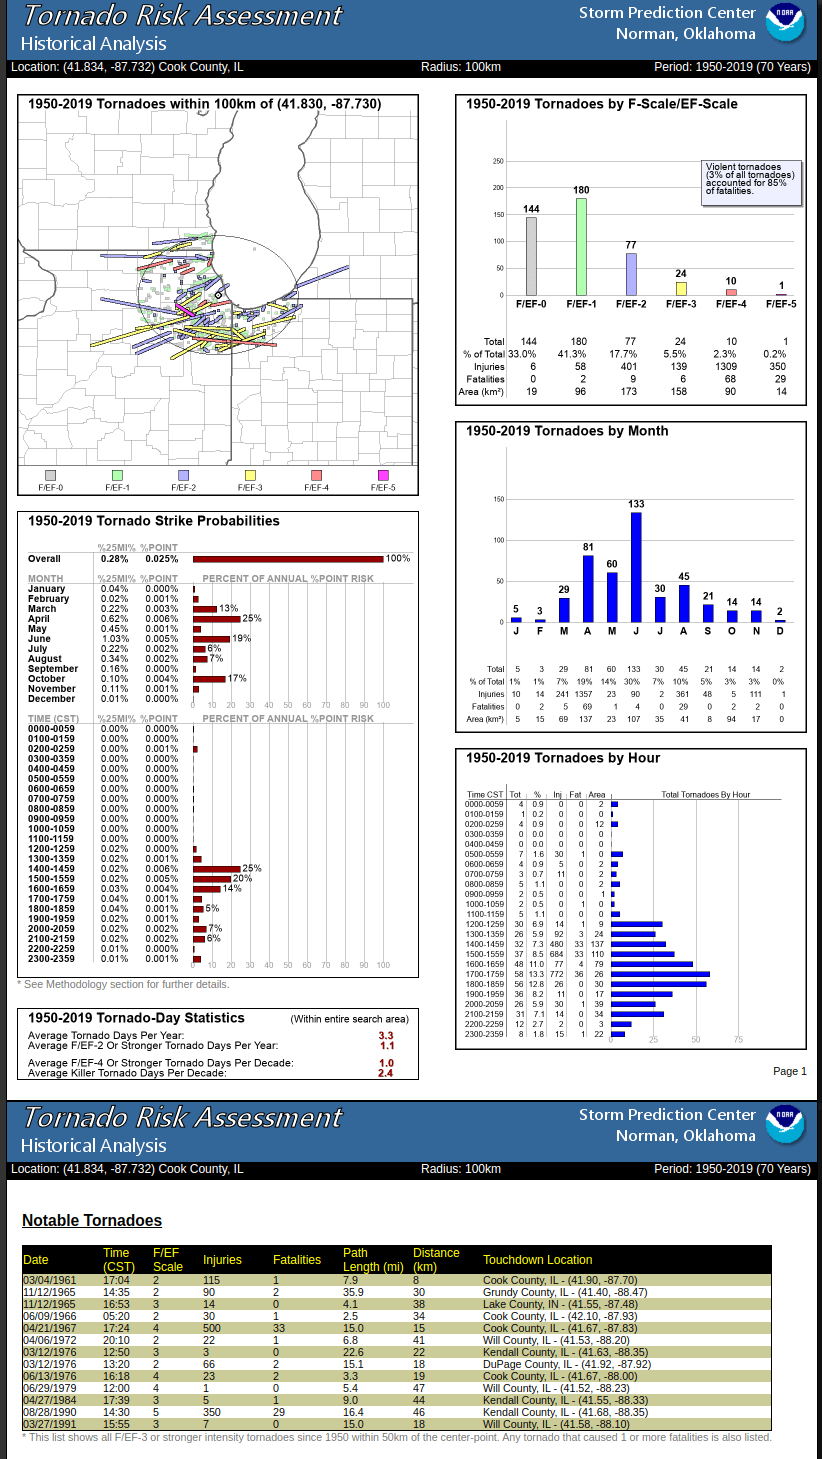 A dashboard created by NOAA's SPC to model tornado severity and risk